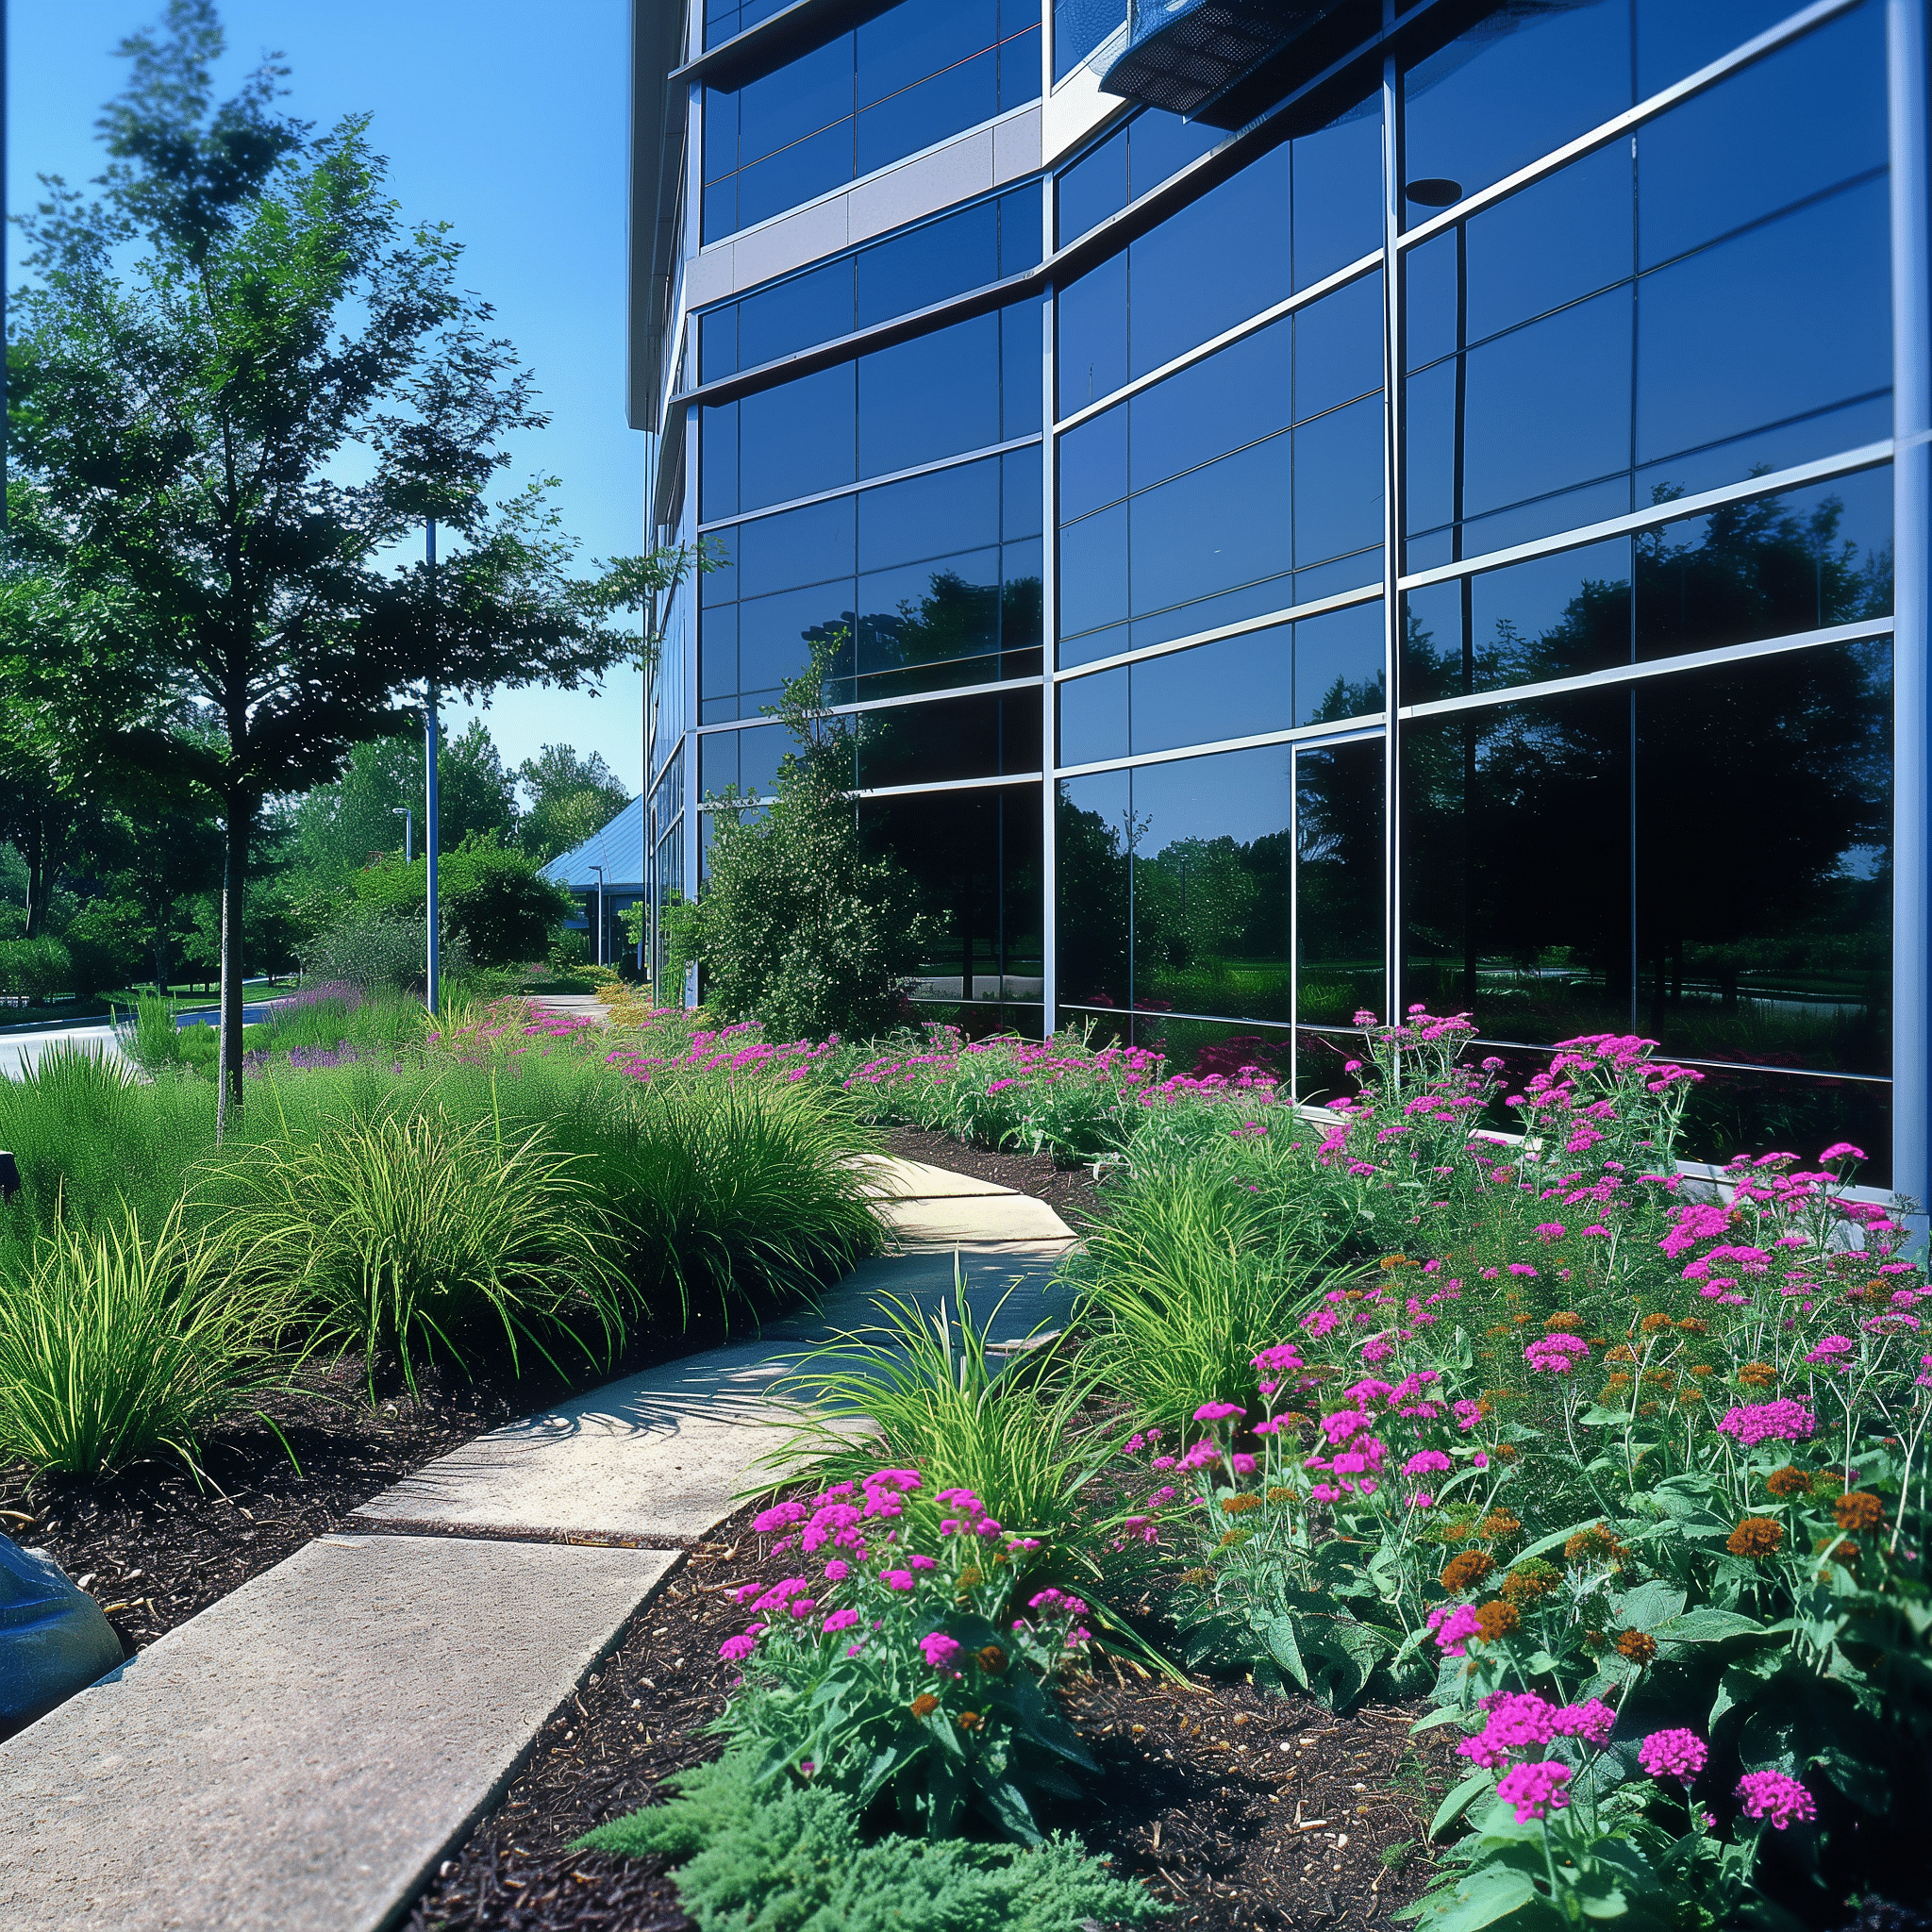 Landscaping for Commercial in Bucks County, PA